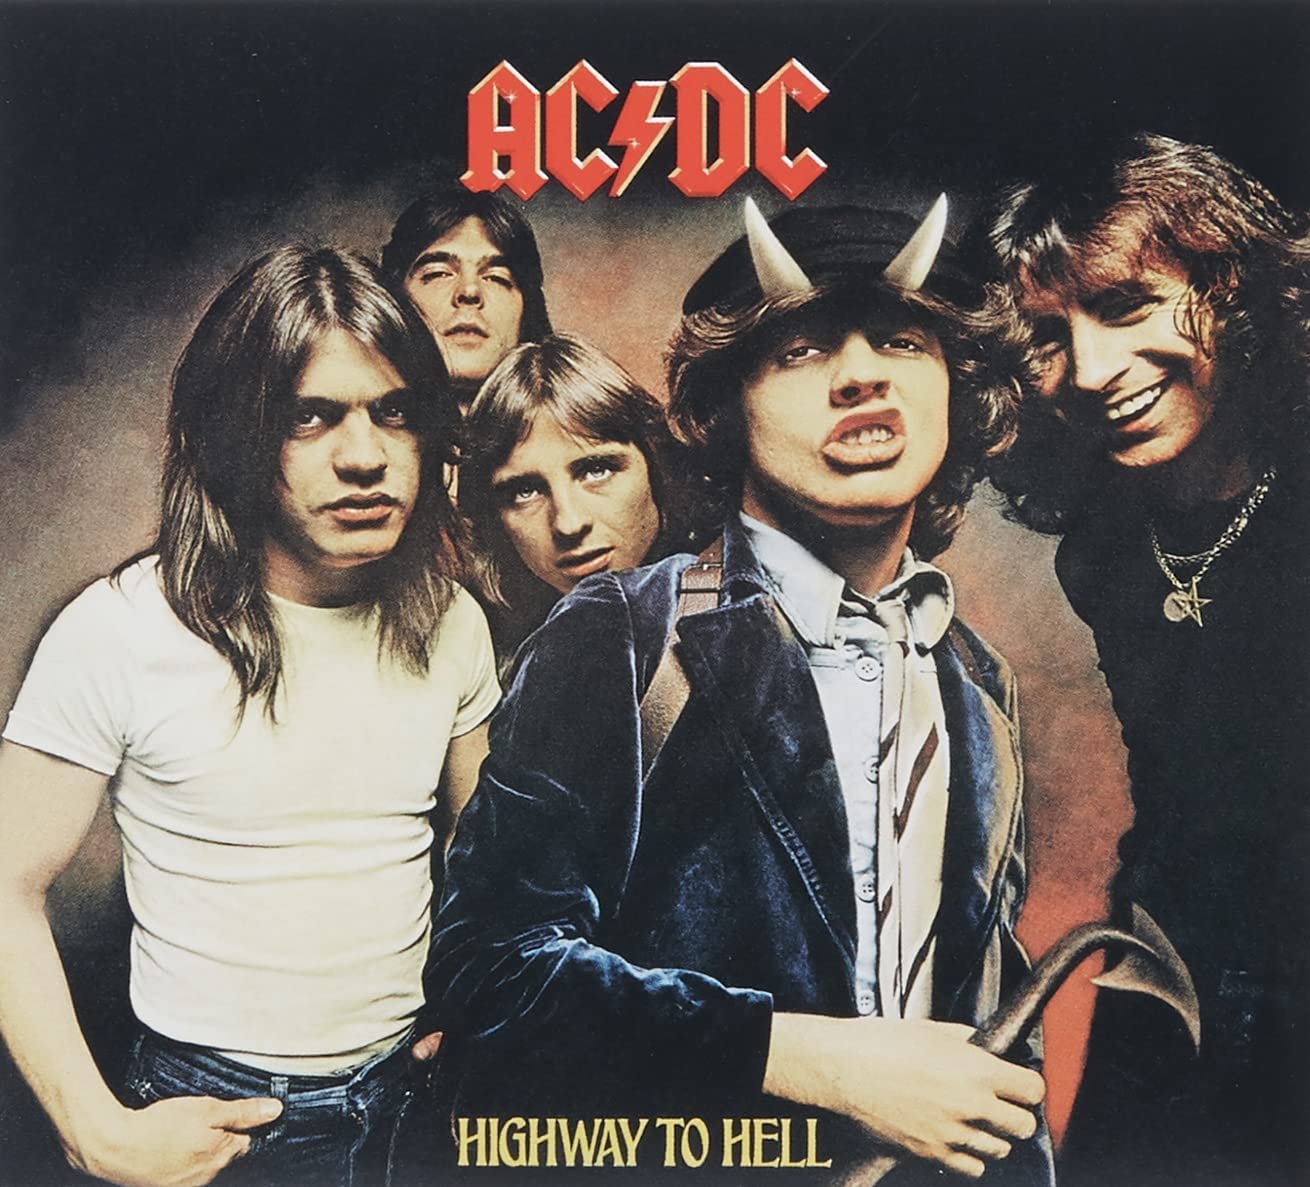 18." Highway To Hell" by AC/DC